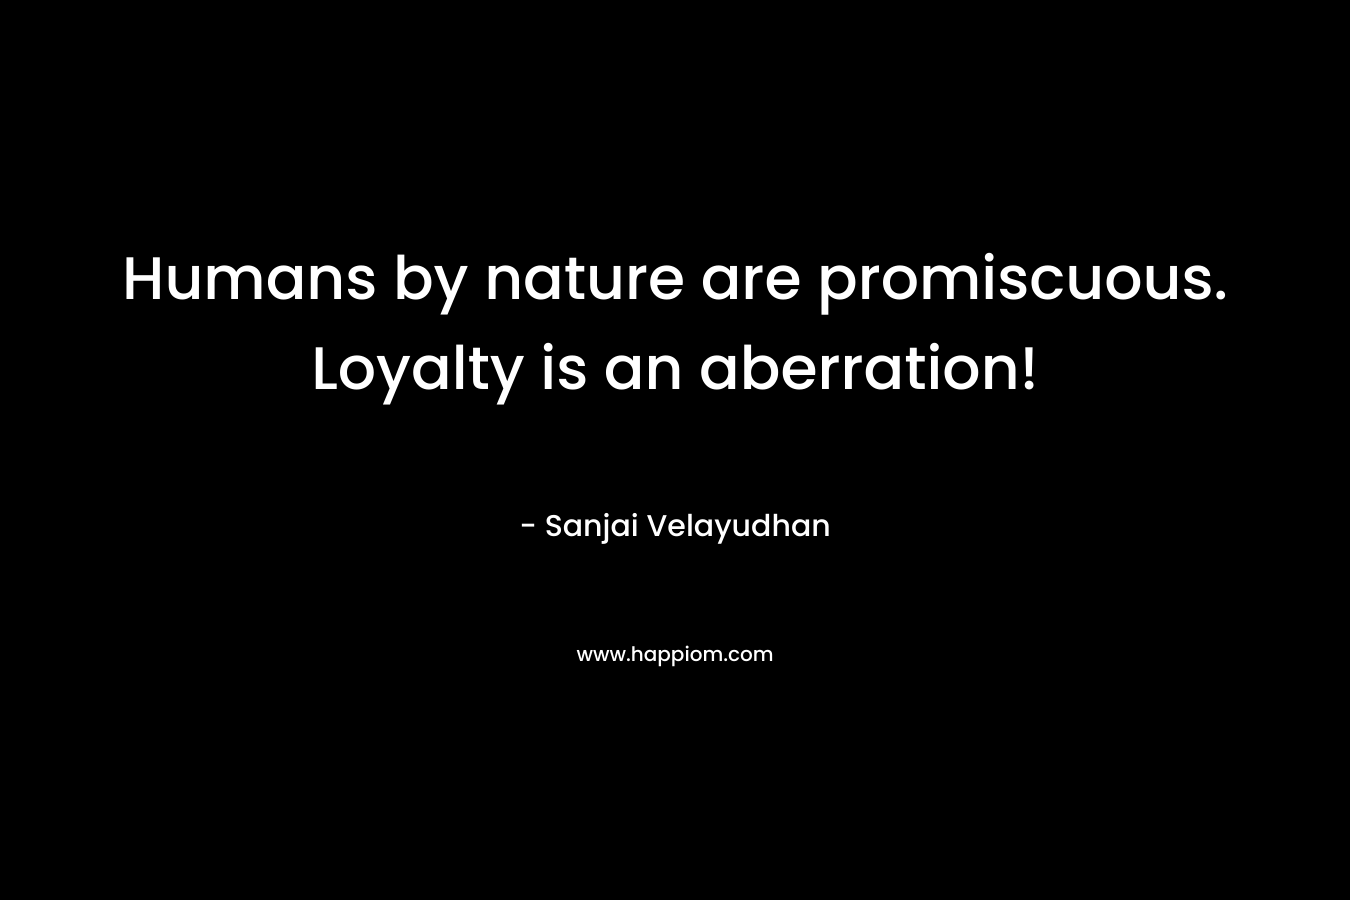 Humans by nature are promiscuous. Loyalty is an aberration! – Sanjai Velayudhan